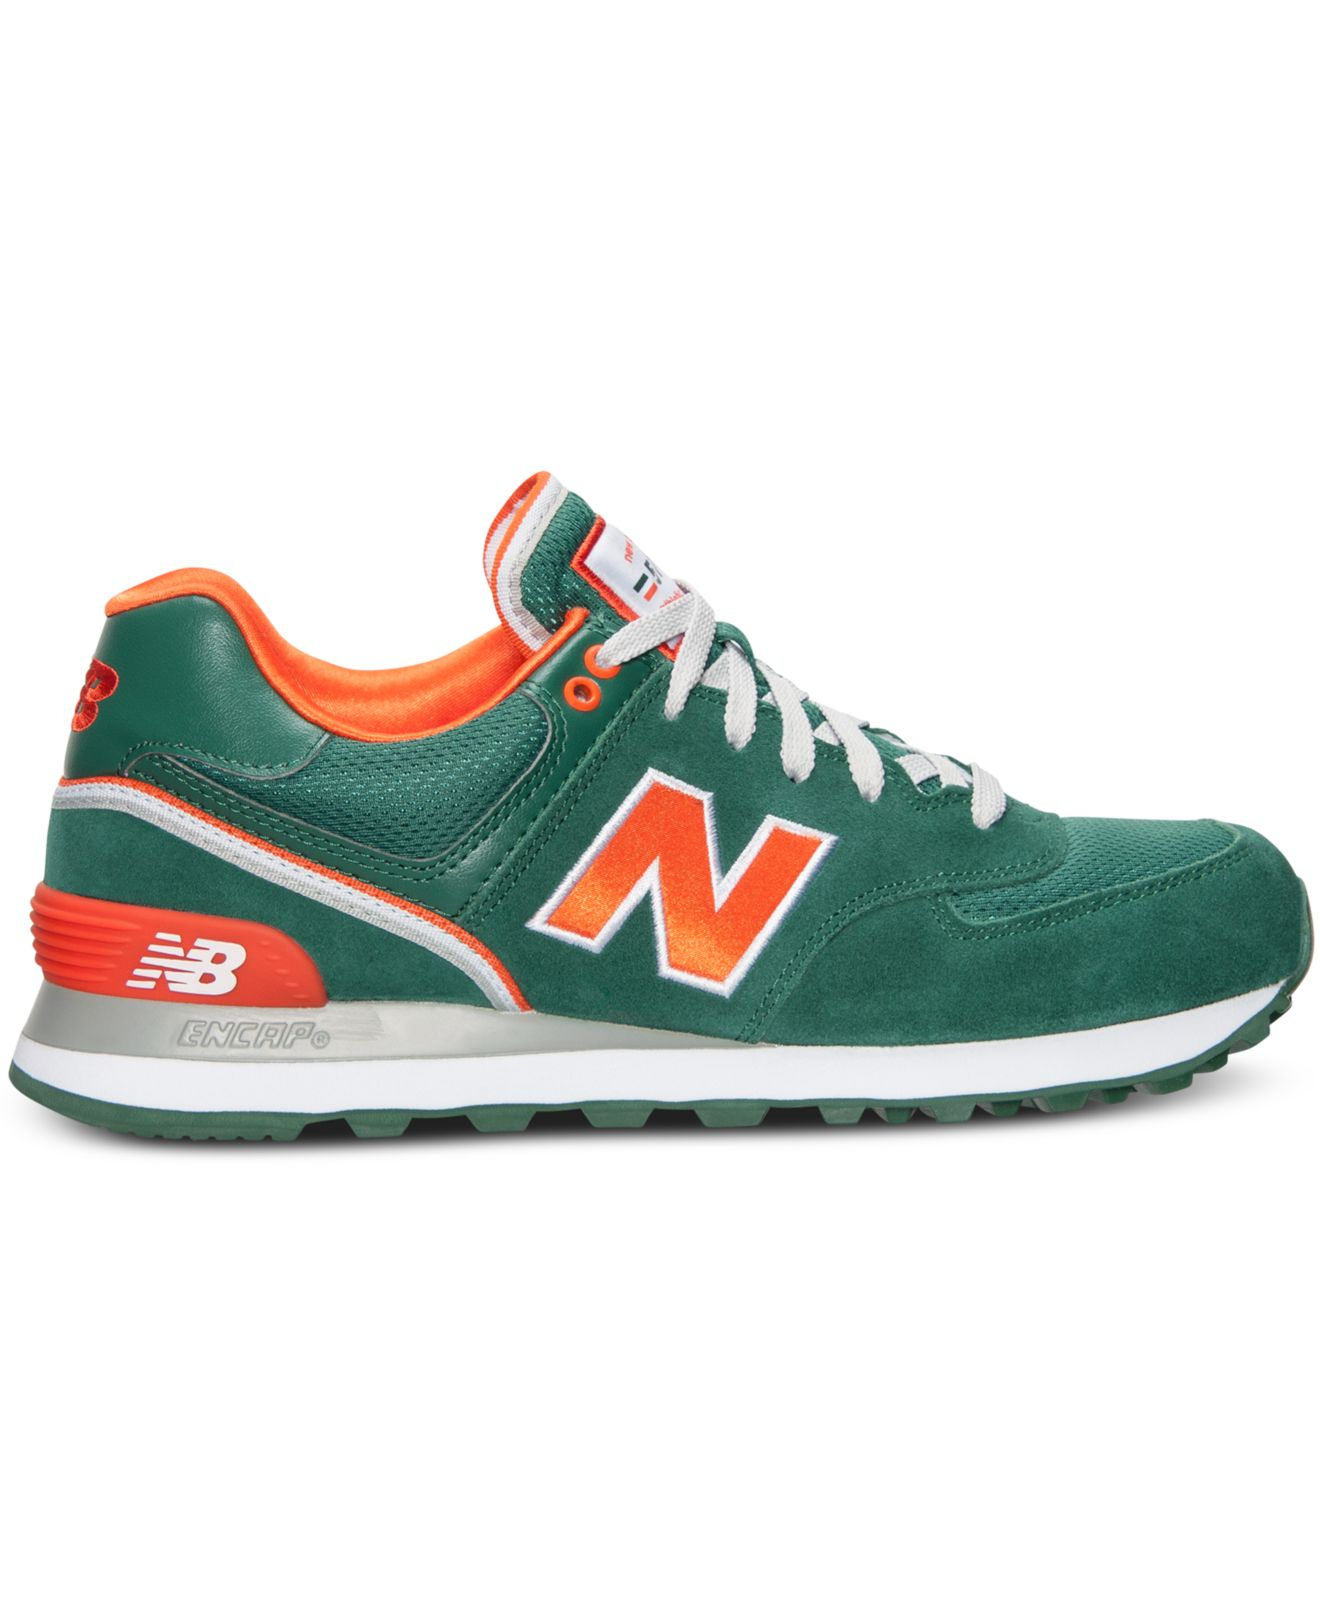 New balance Men'S 574 Stadium Jacket Casual Sneakers From Finish Line ...